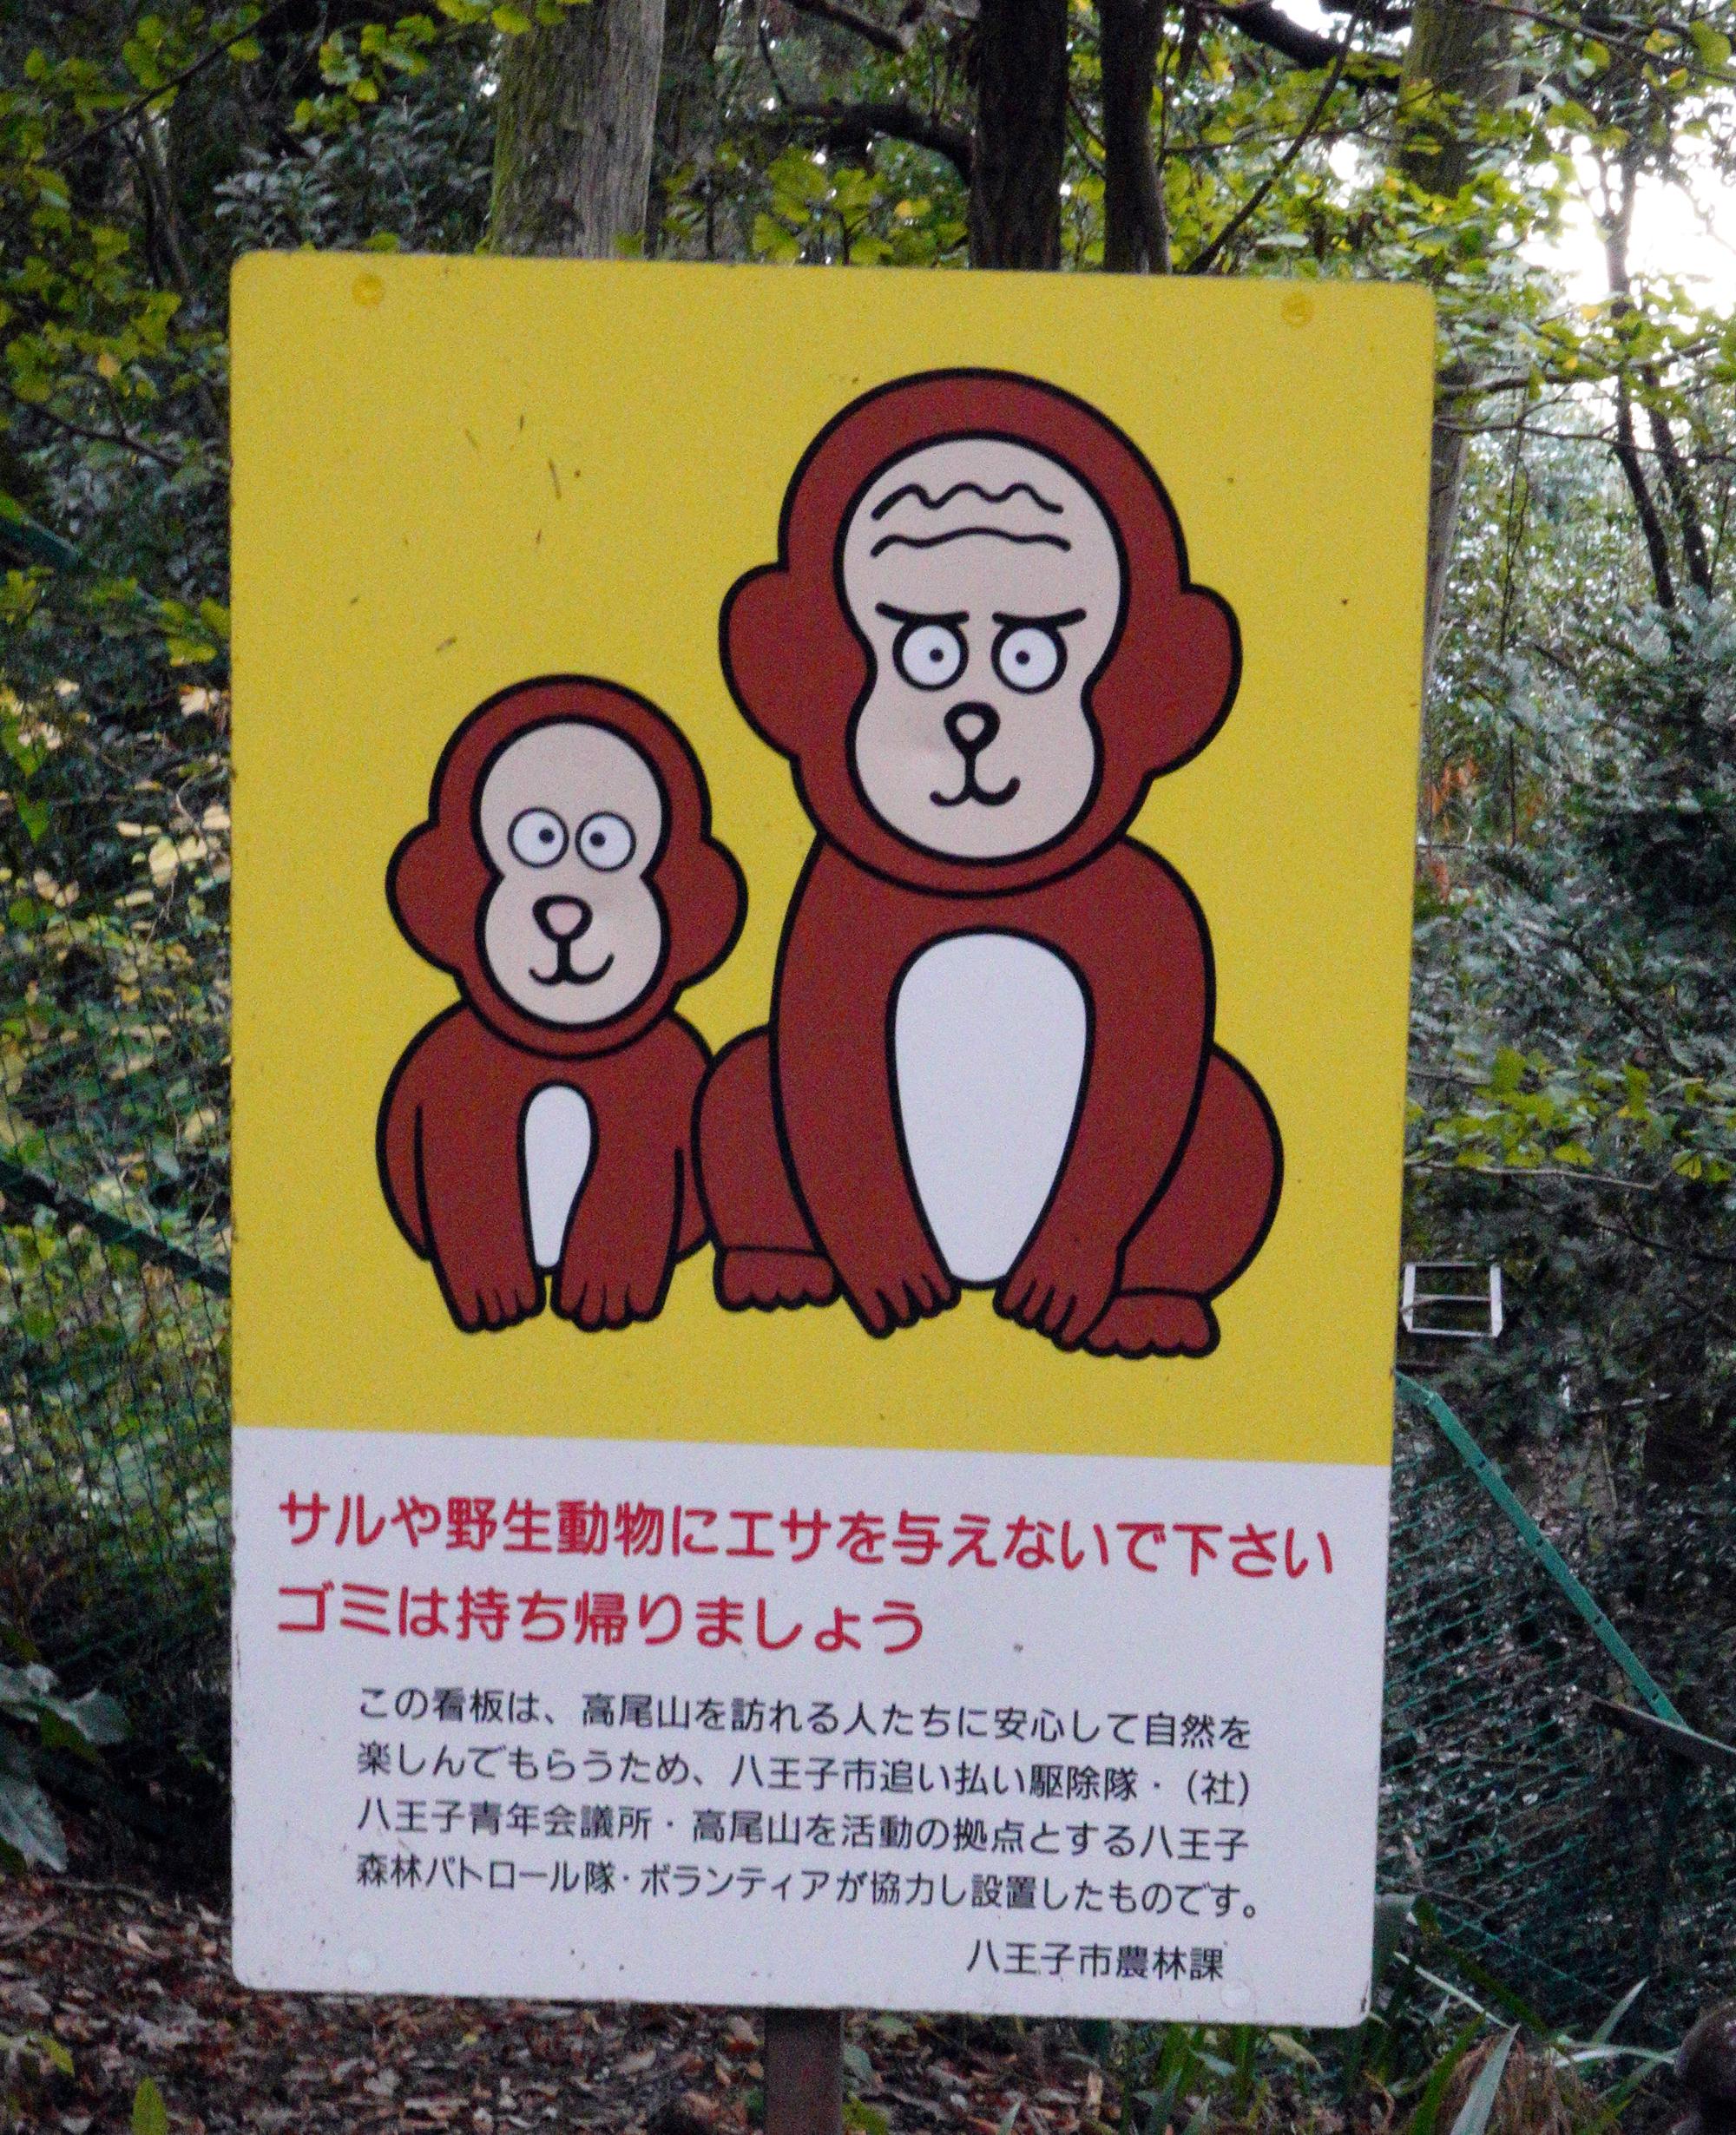 Signs Of Japan - Mt Takao Monkey Park